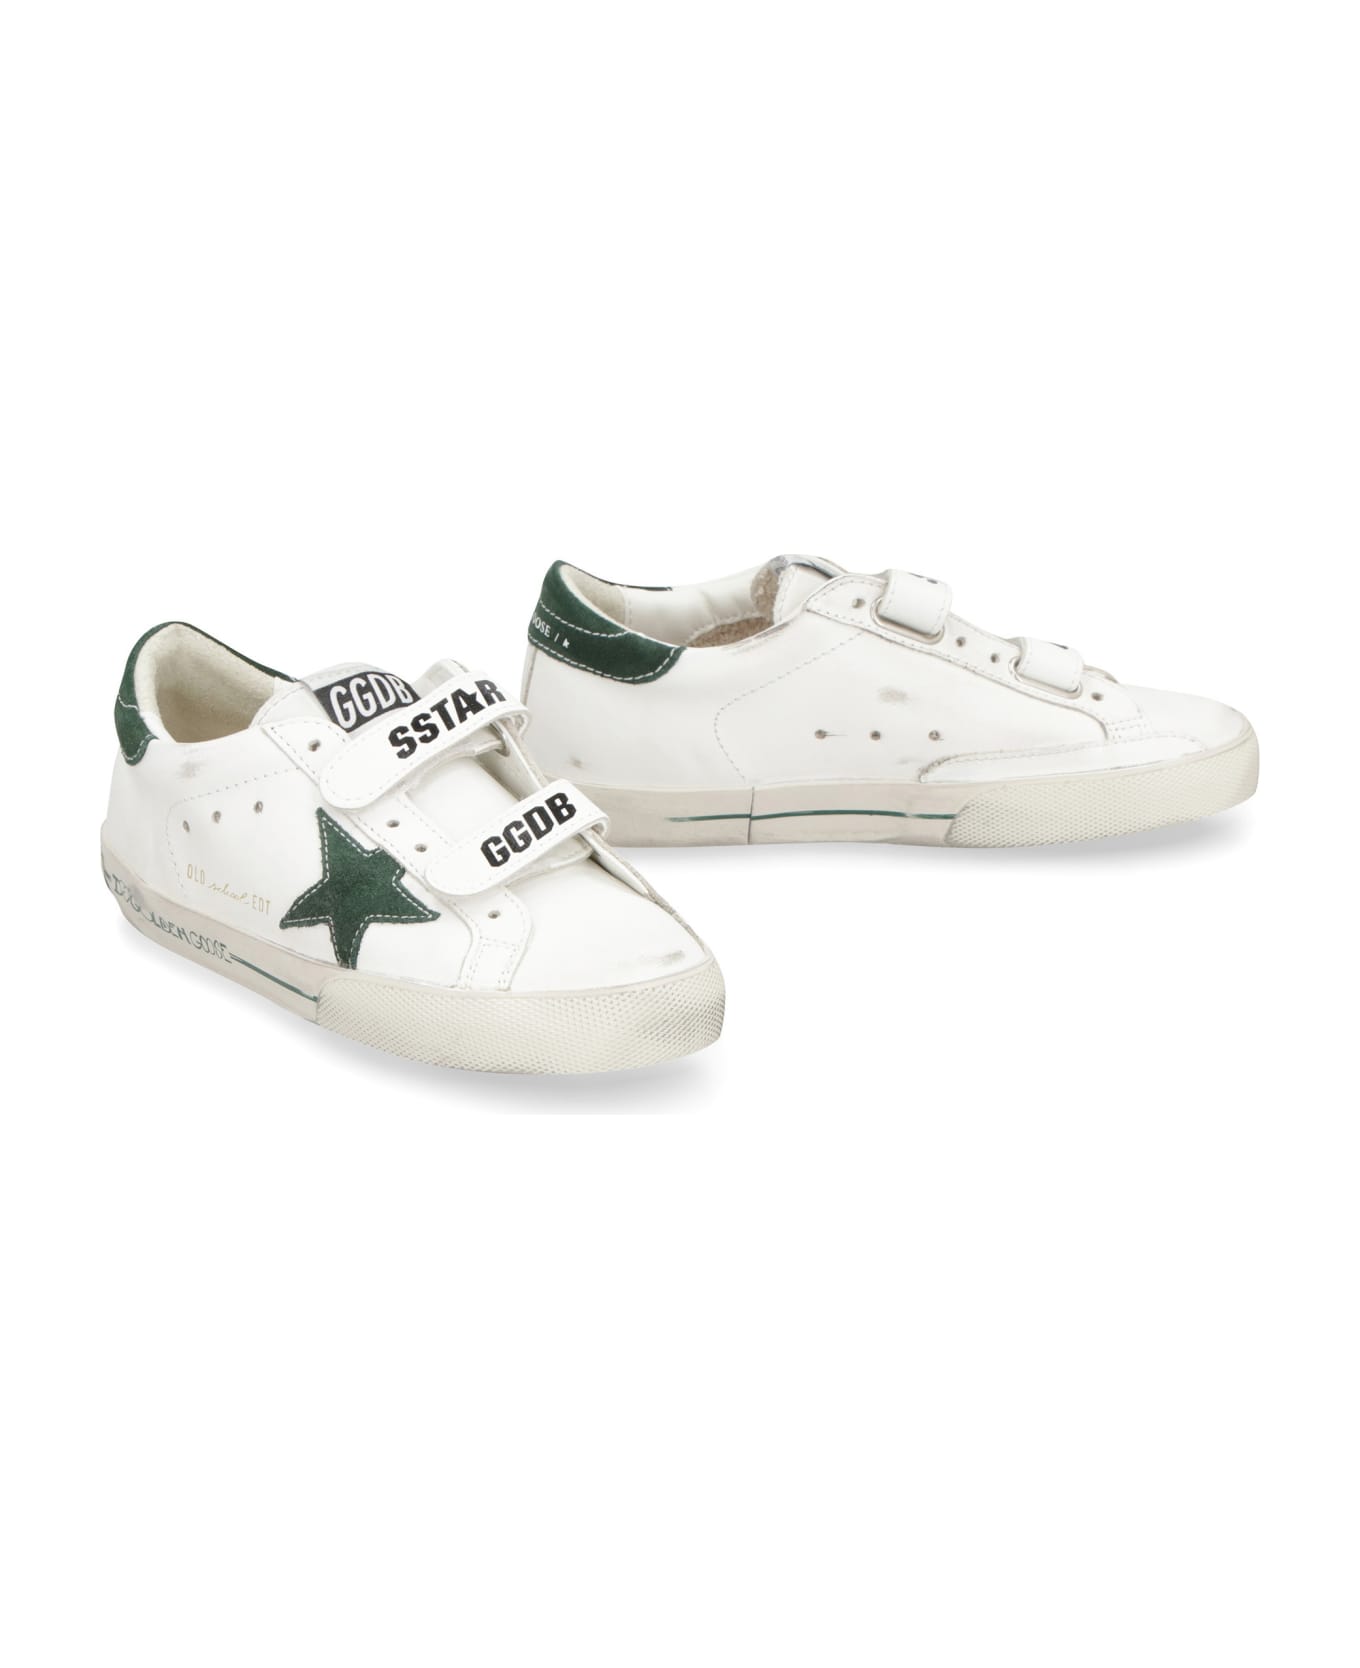 Golden Goose Old School Leather Sneakers - White シューズ